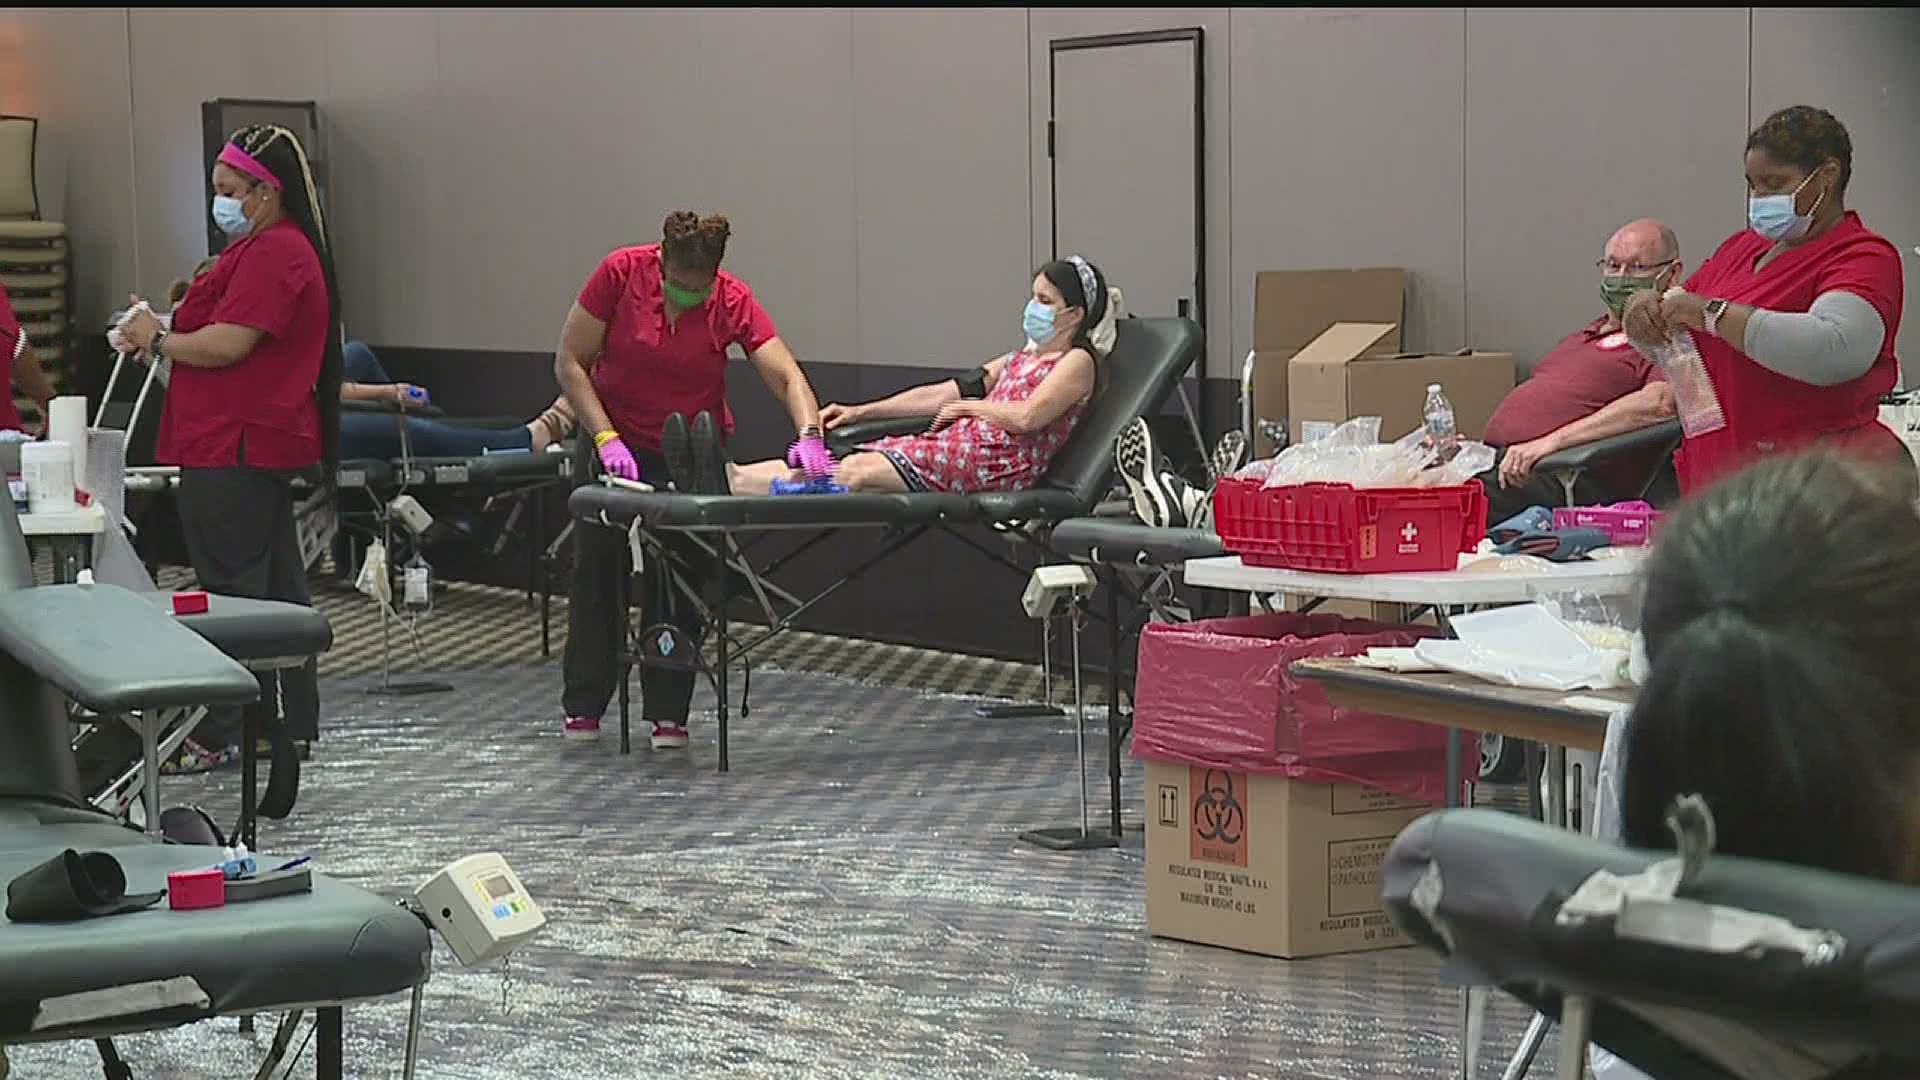 The Central Pennsylvania Blood Bank says its blood supply is at a historic low, causing extreme stress on local hospitals.